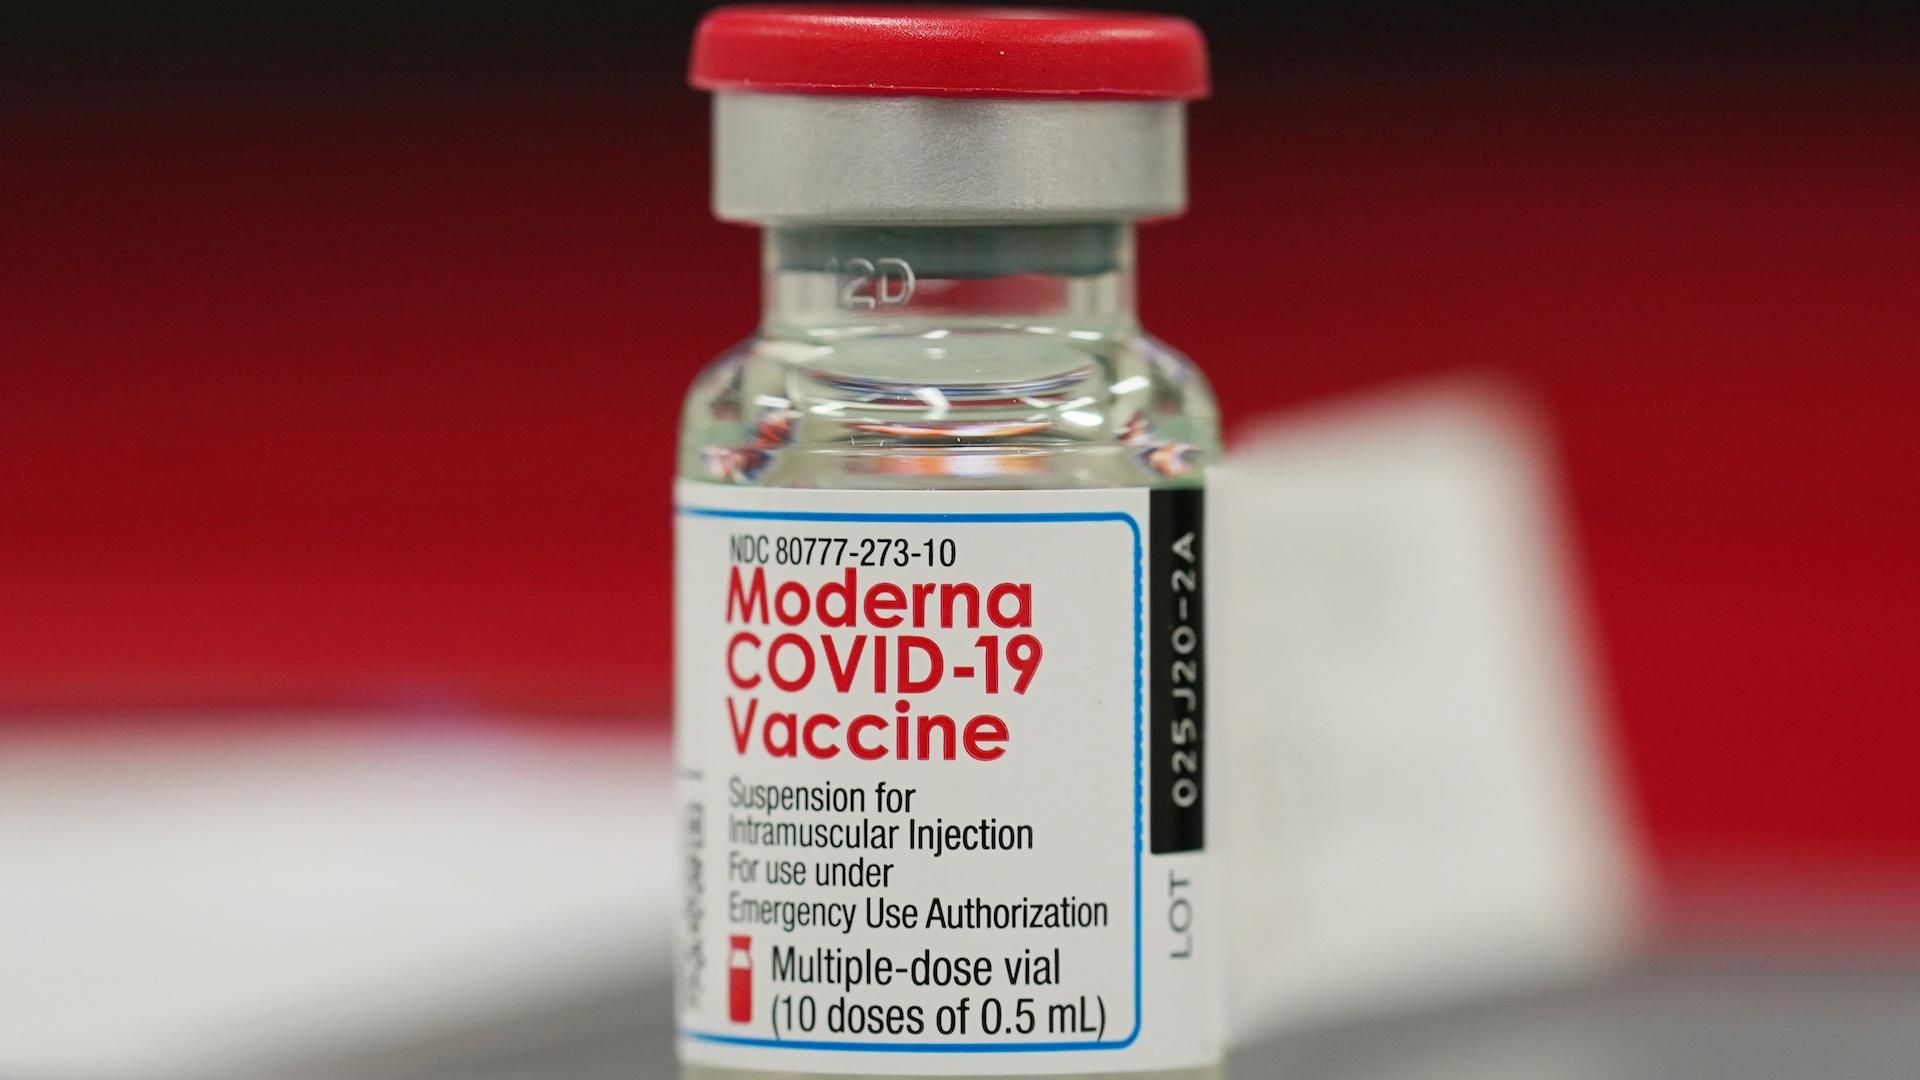 This Dec. 23, 2020 file photo shows a vial of the Moderna COVID-19 vaccine in the first round of staff vaccinations at a hospital in Denver. (AP Photo/David Zalubowski, File)